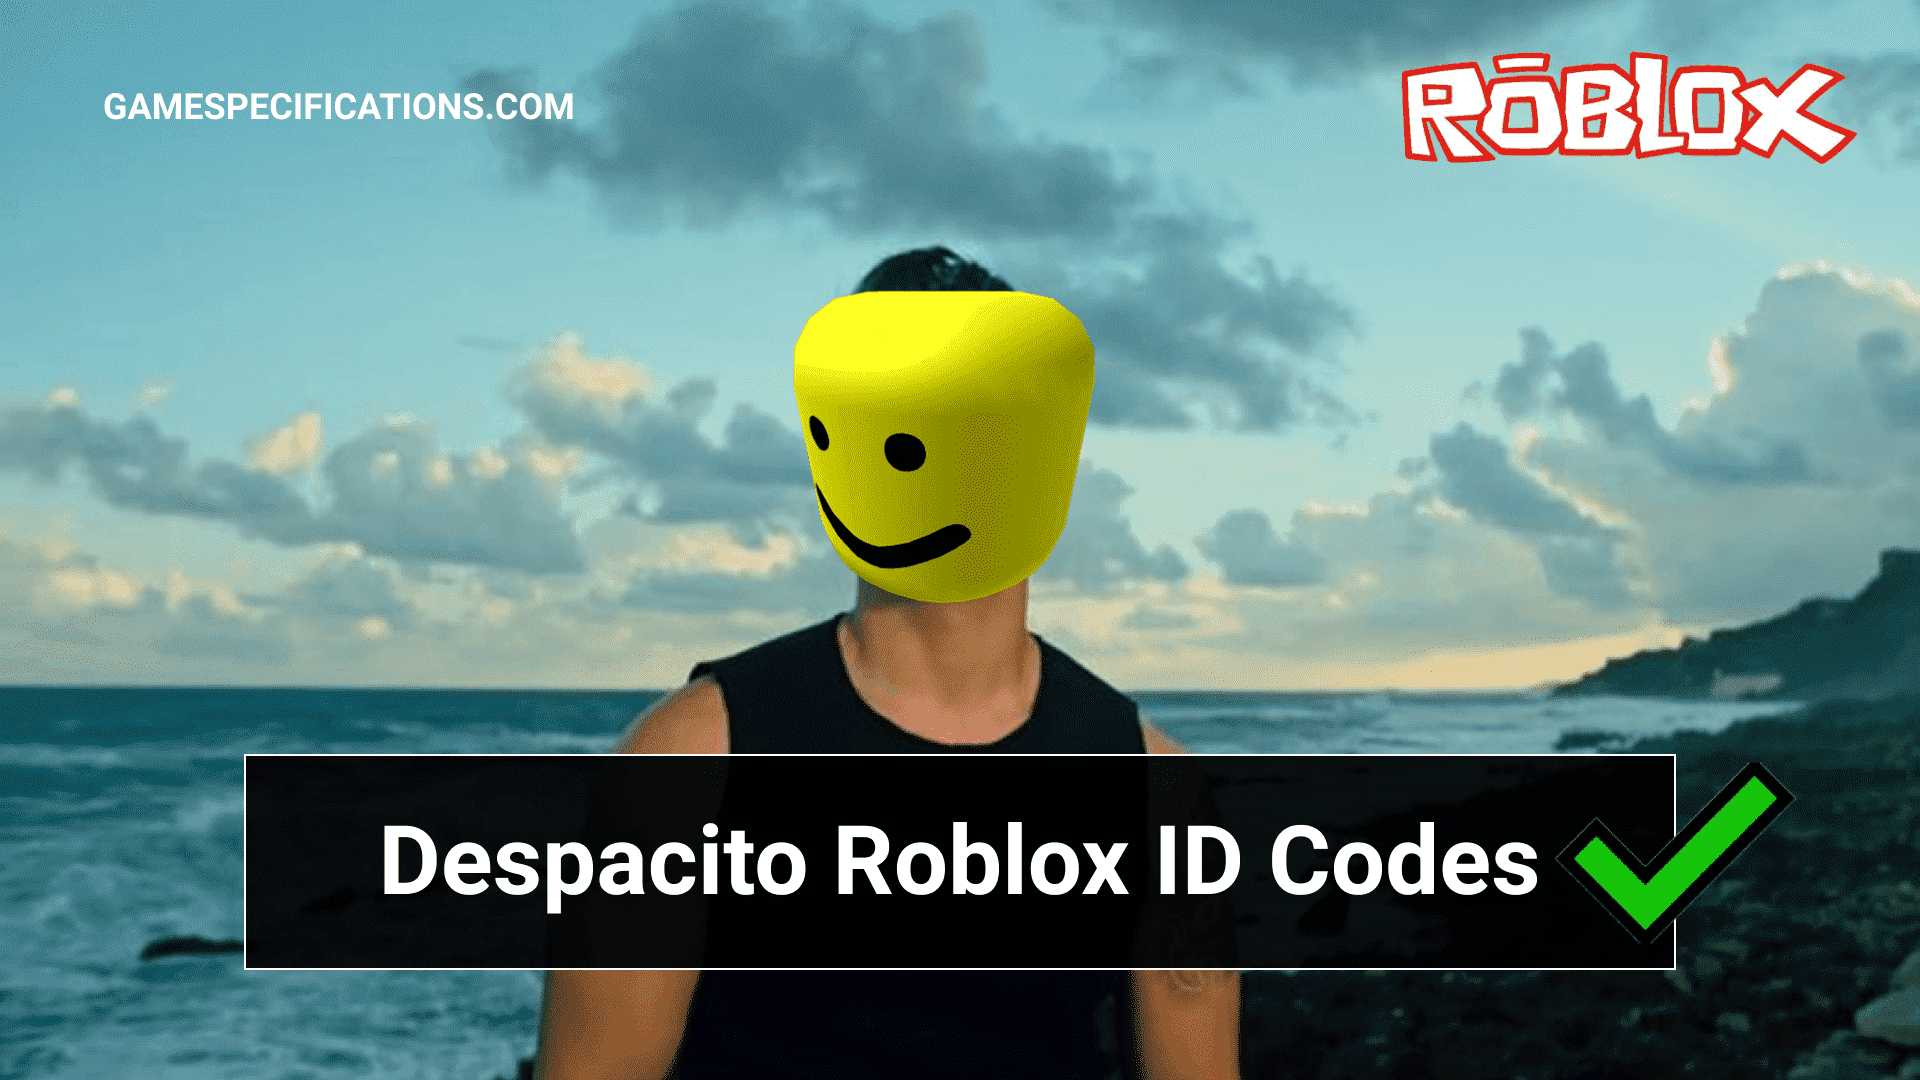 Despacito Roblox Id Codes To Play Awesome Spanish Song 2021 Game Specifications - longest roblox audio